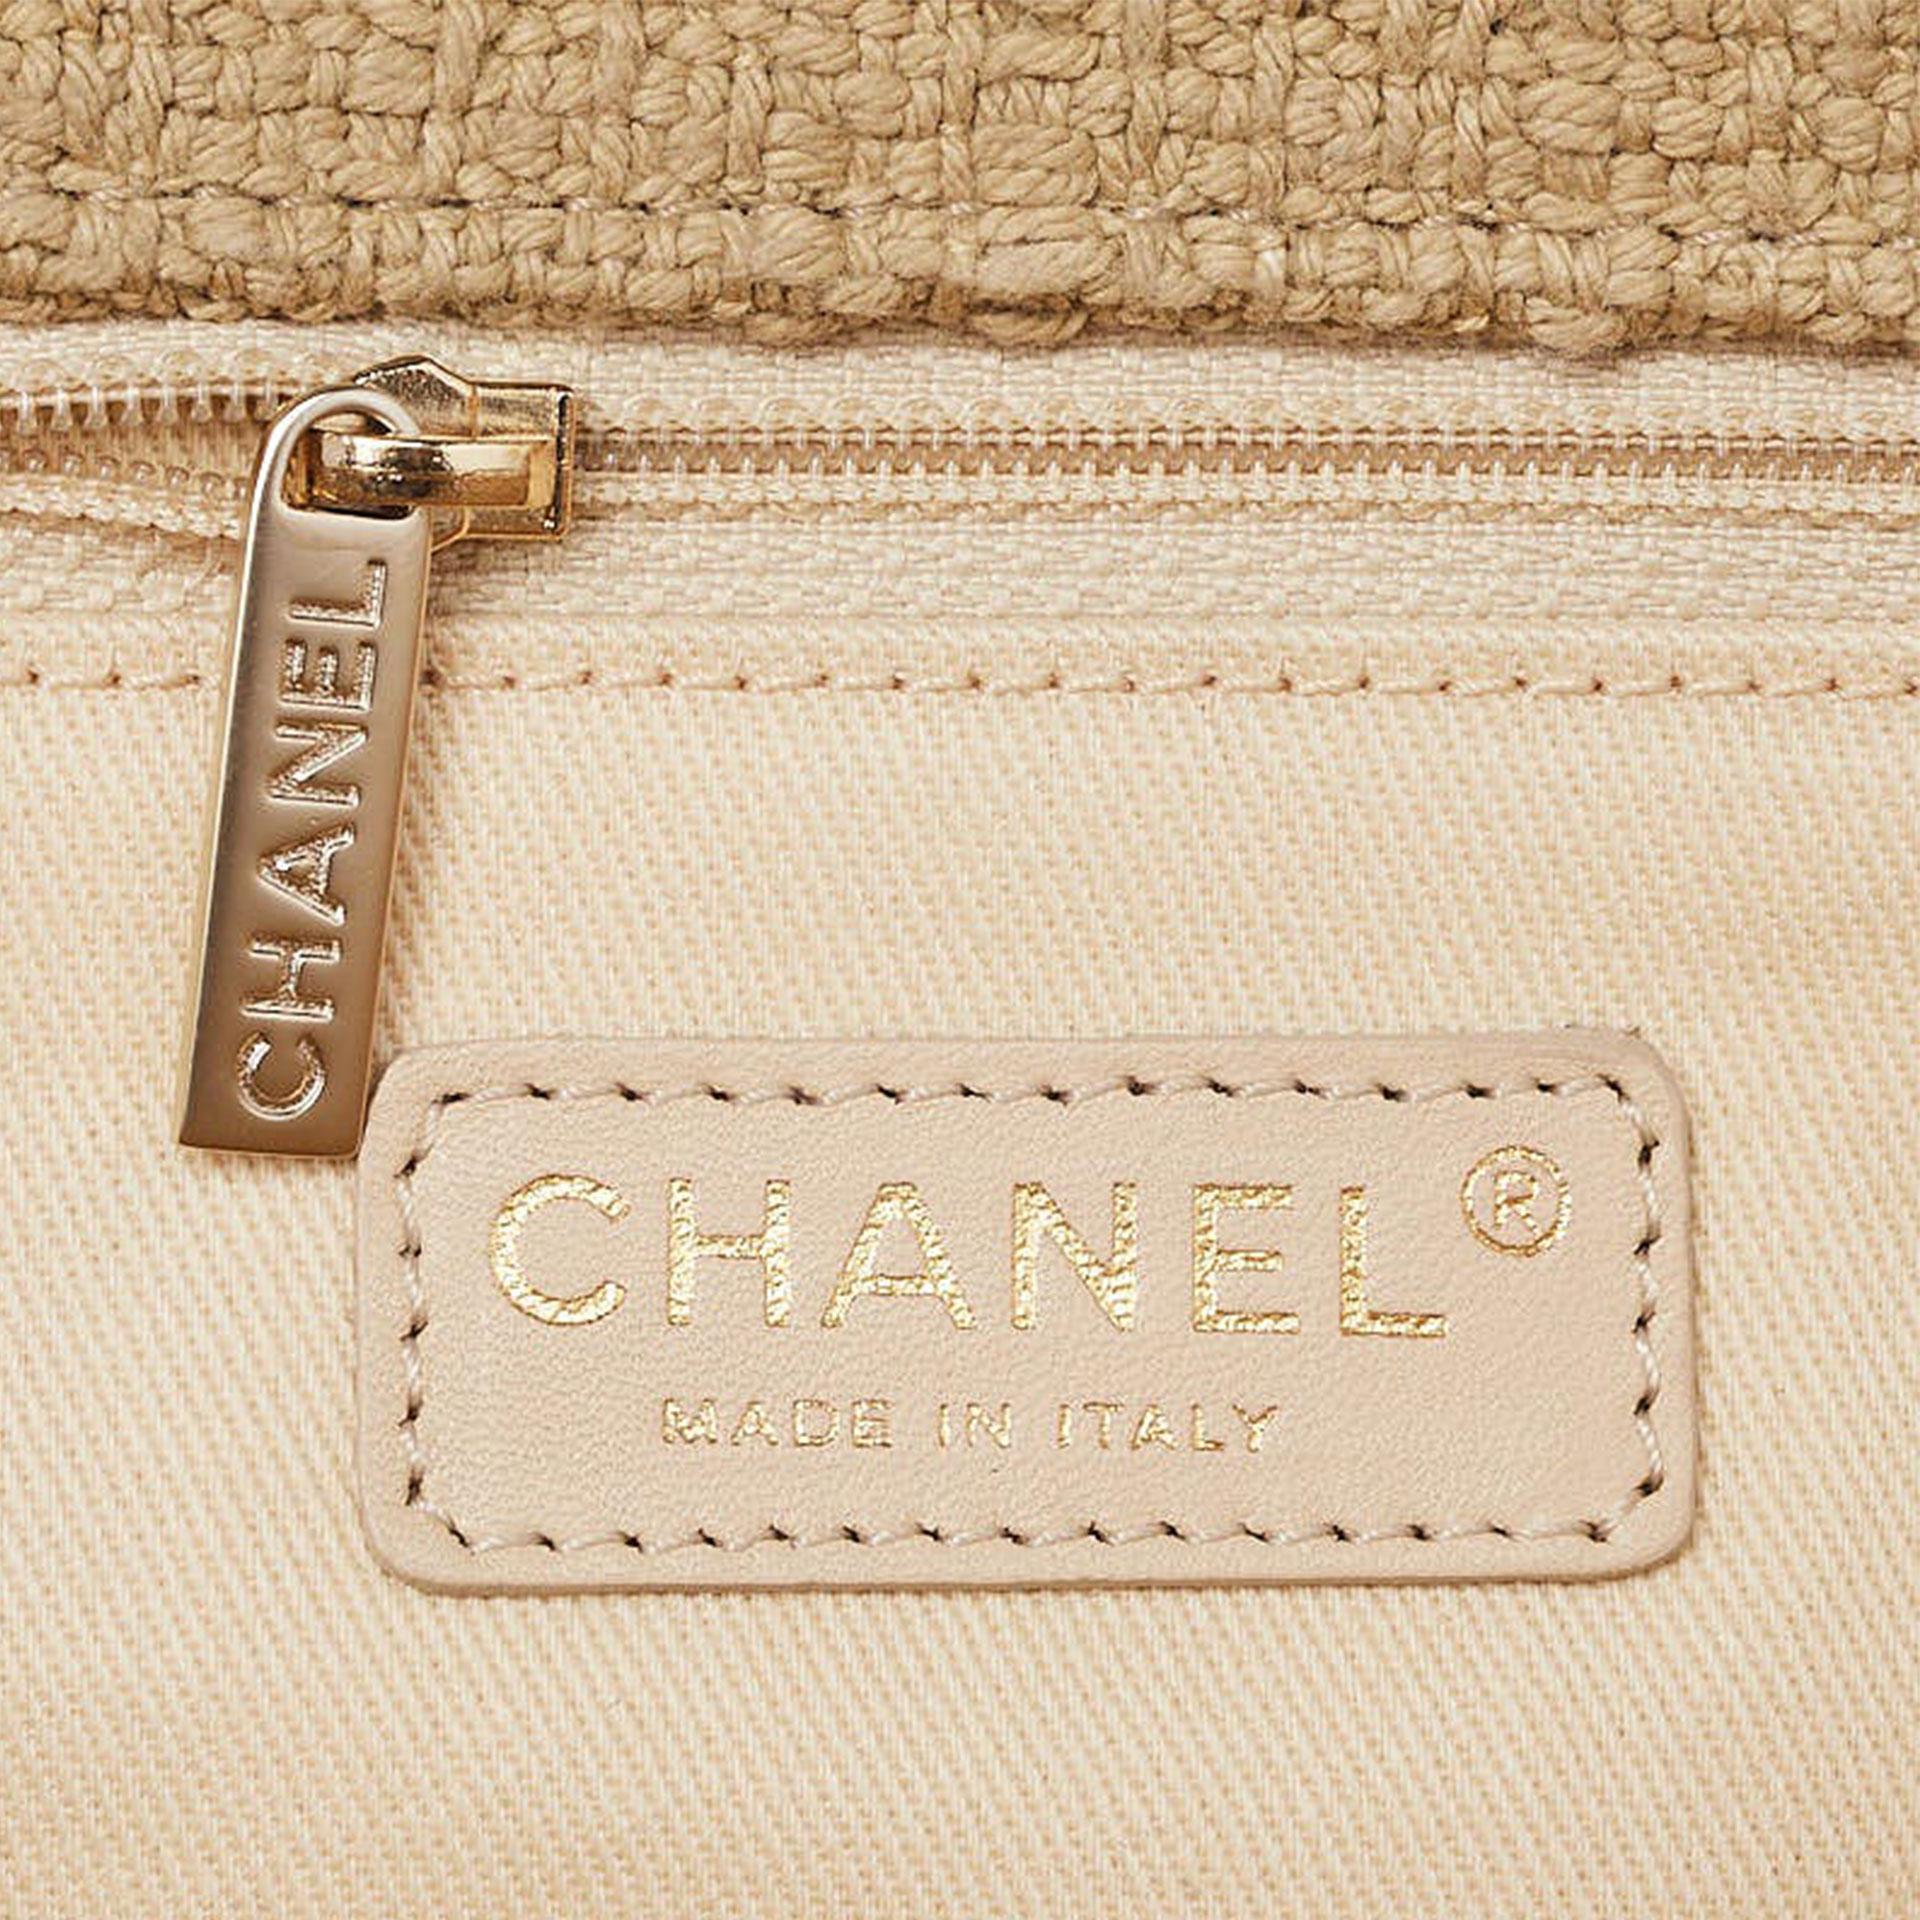 Chanel Limited Edition XL Maxi Organic Tweed Woven Summer Vacation Shoulder Bag  For Sale 6